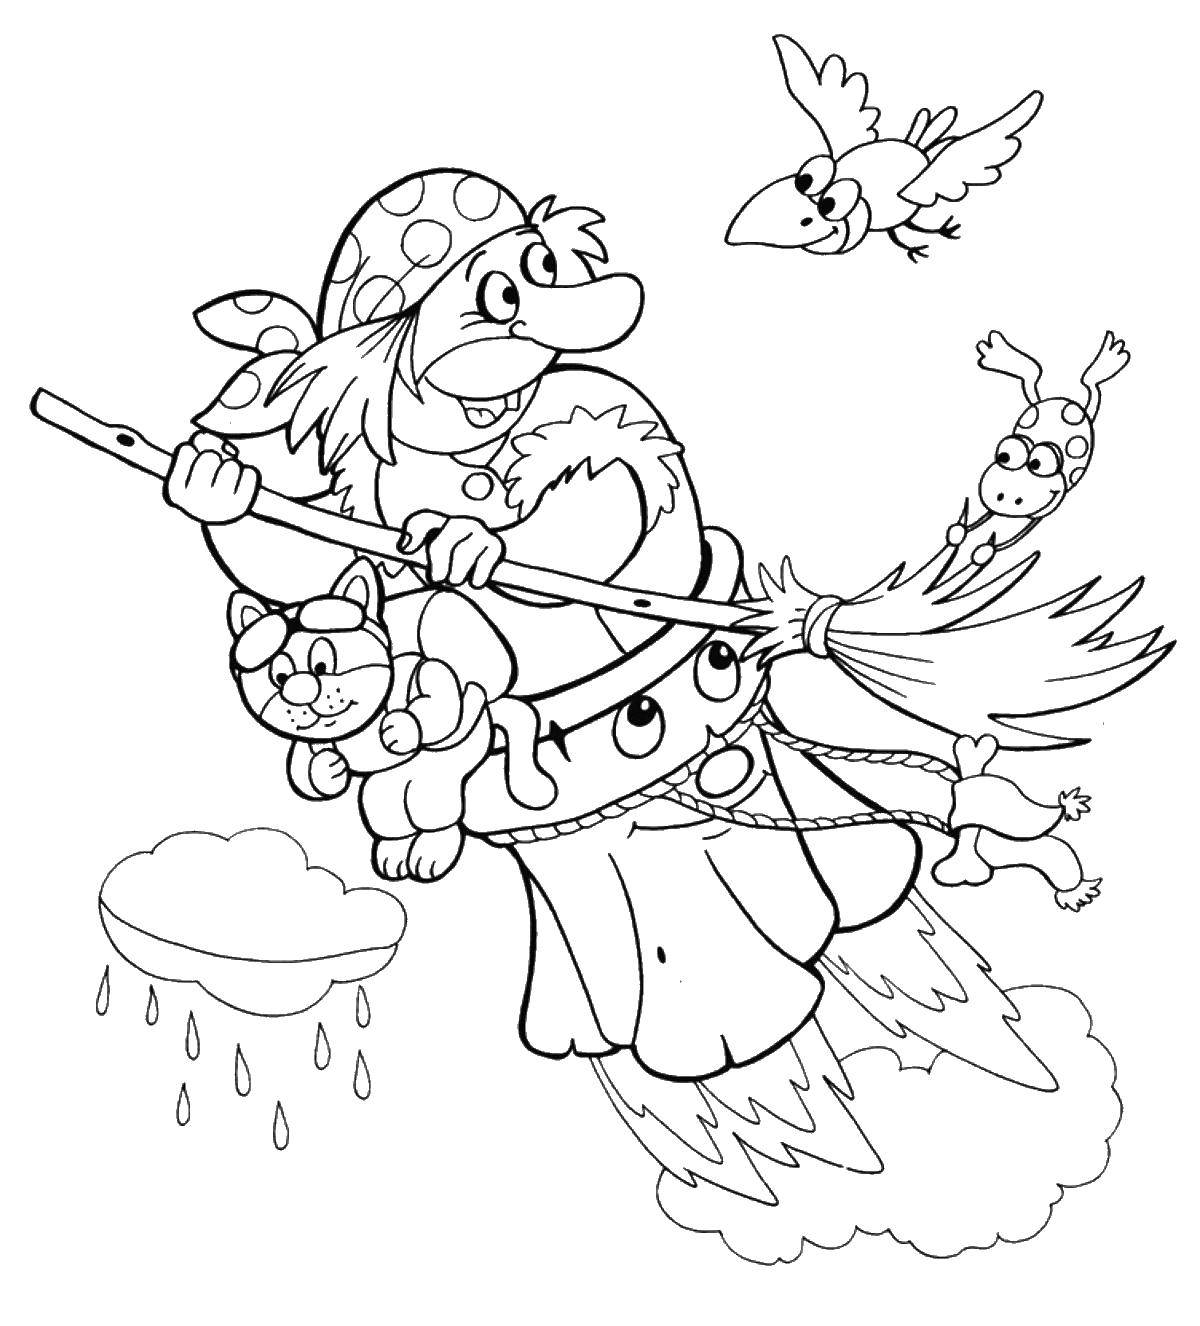 Coloring Baba Yaga flying on a broom. Category Baba Yaga. Tags:  Baba Yaga, broom.